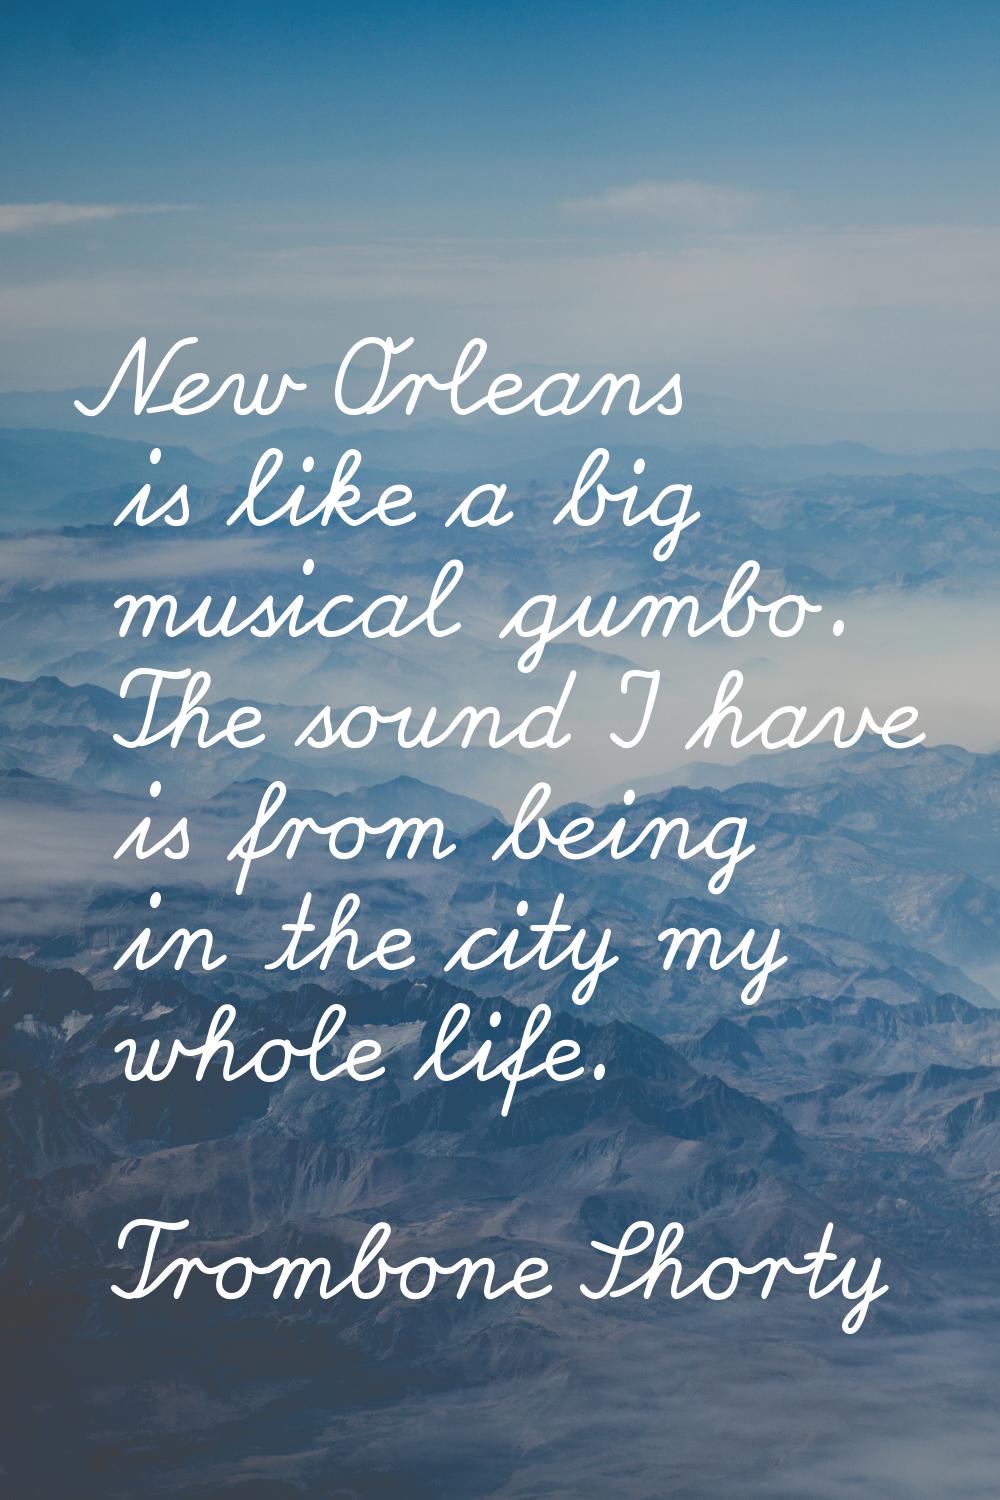 New Orleans is like a big musical gumbo. The sound I have is from being in the city my whole life.